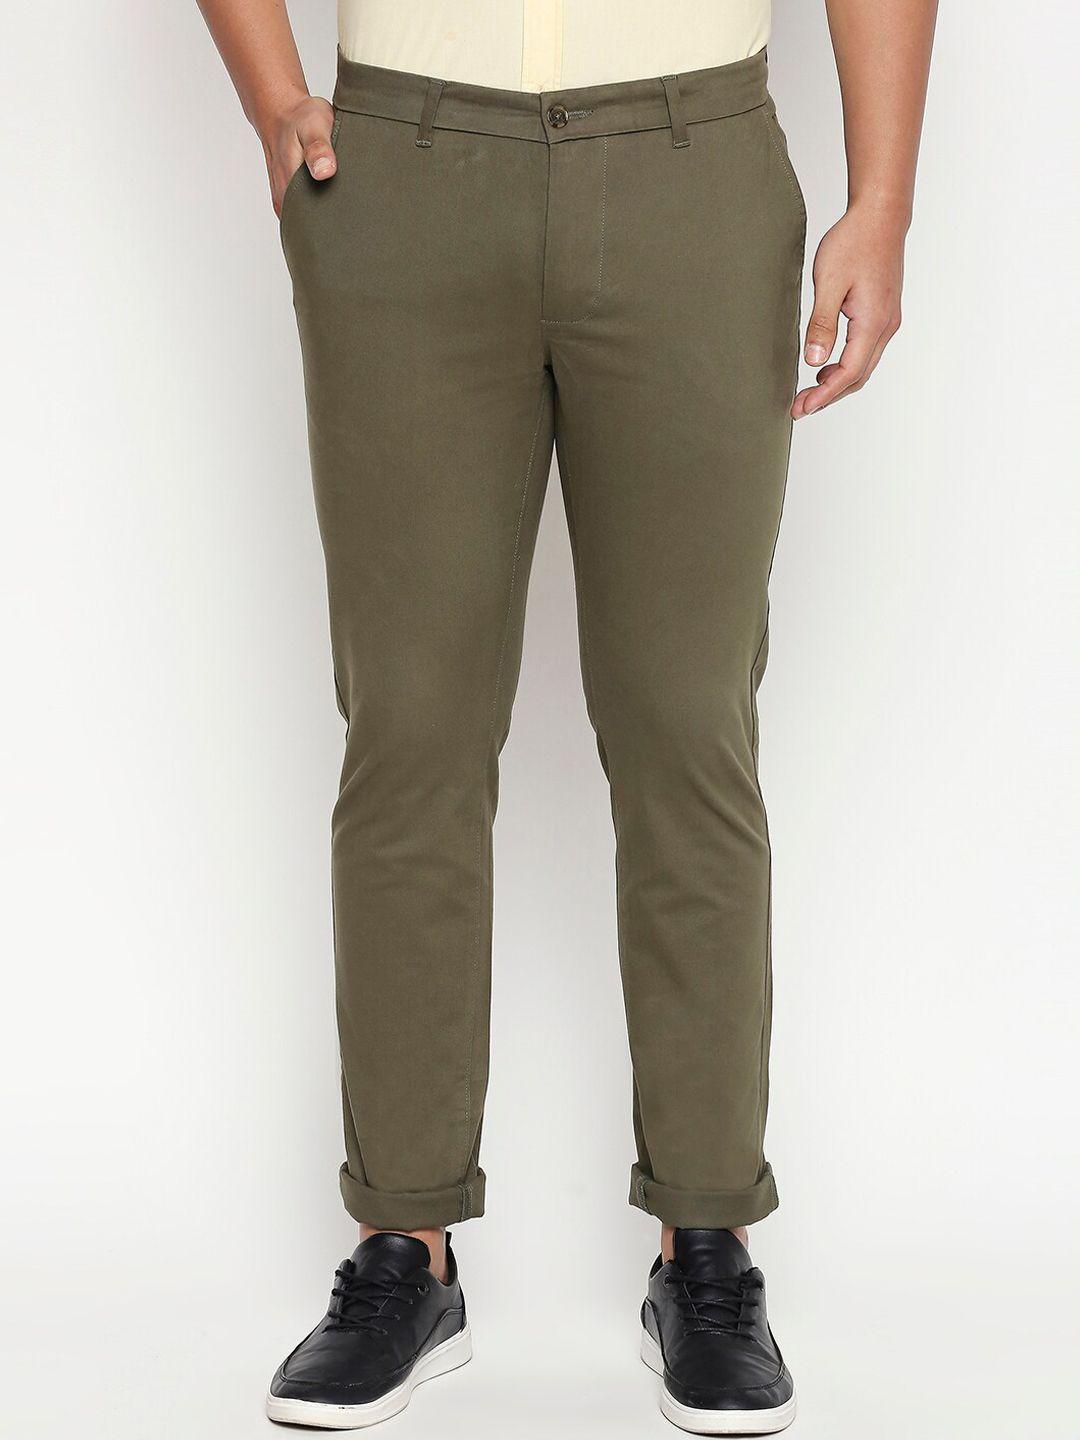 basics men olive green cotton tapered fit high-rise chinos trousers